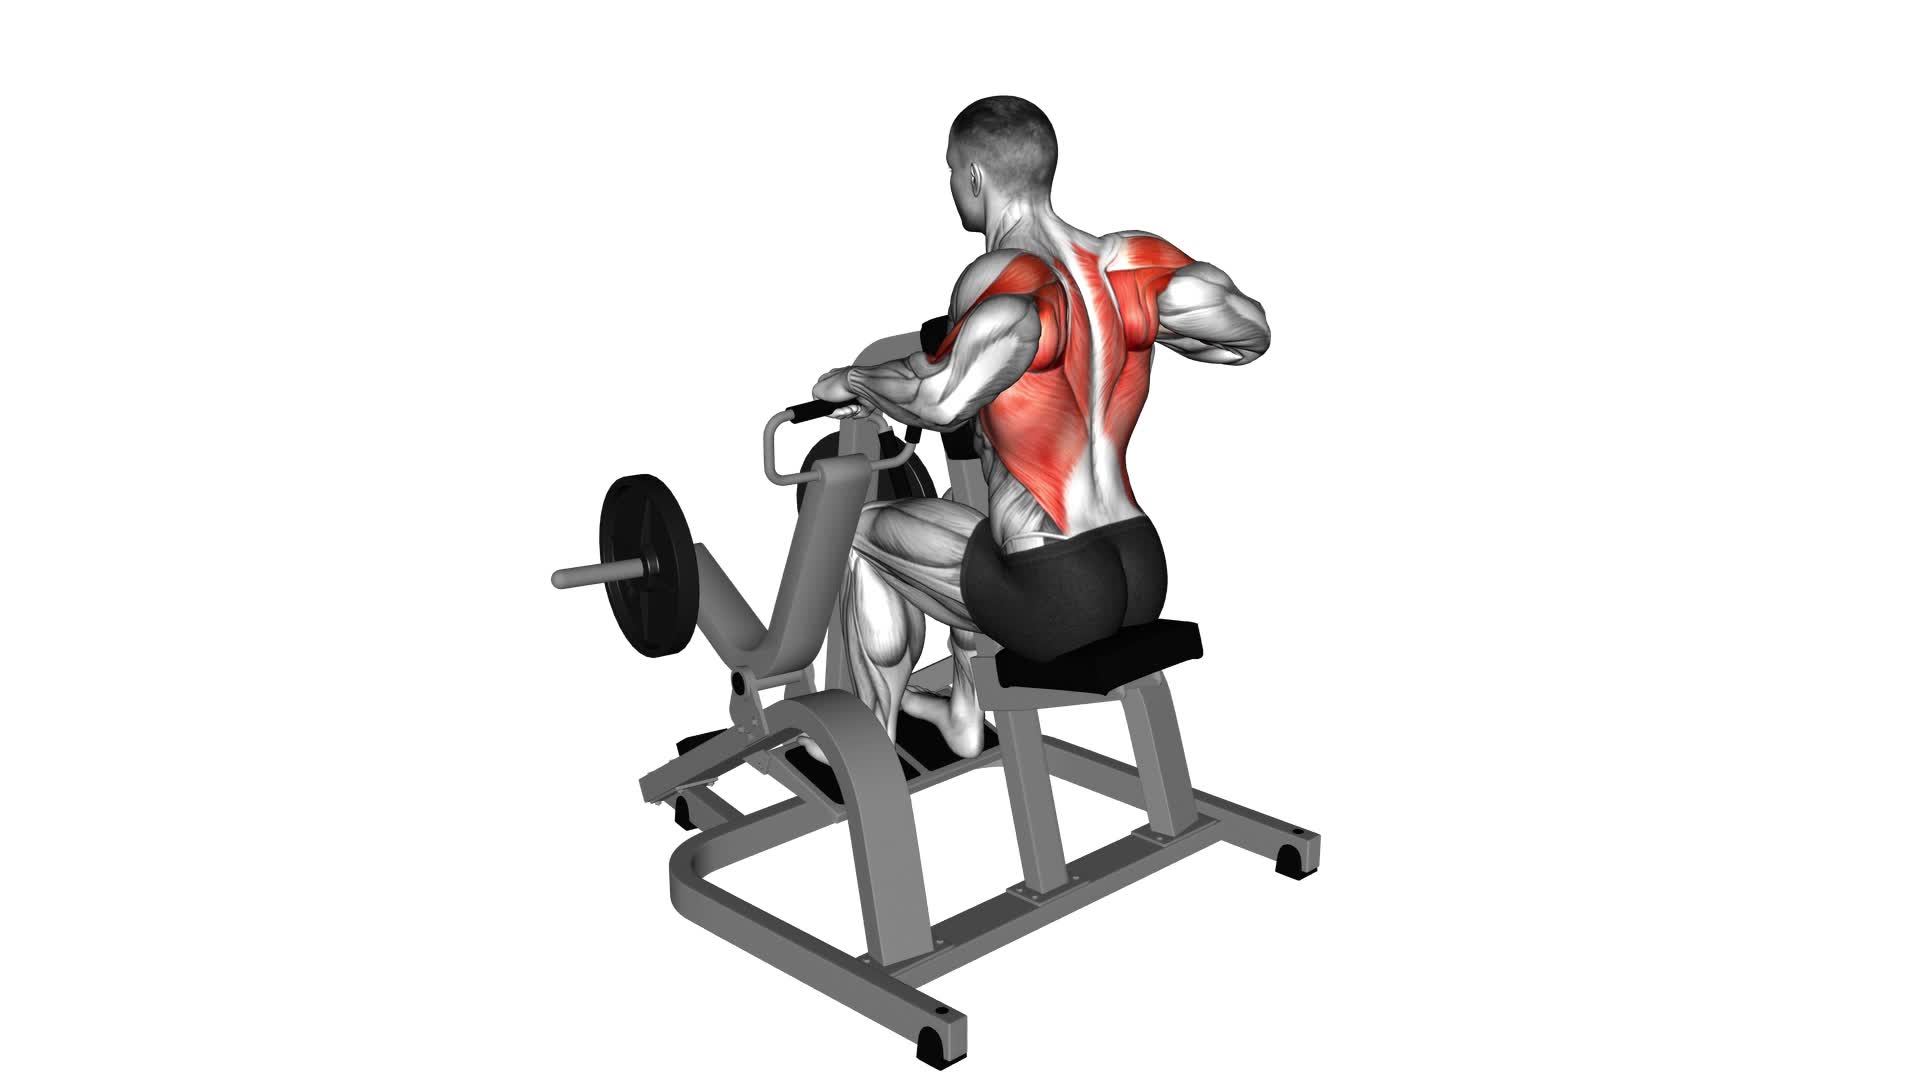 Lever Pronated Grip Seated Row (Plate Loaded) - Video Exercise Guide & Tips